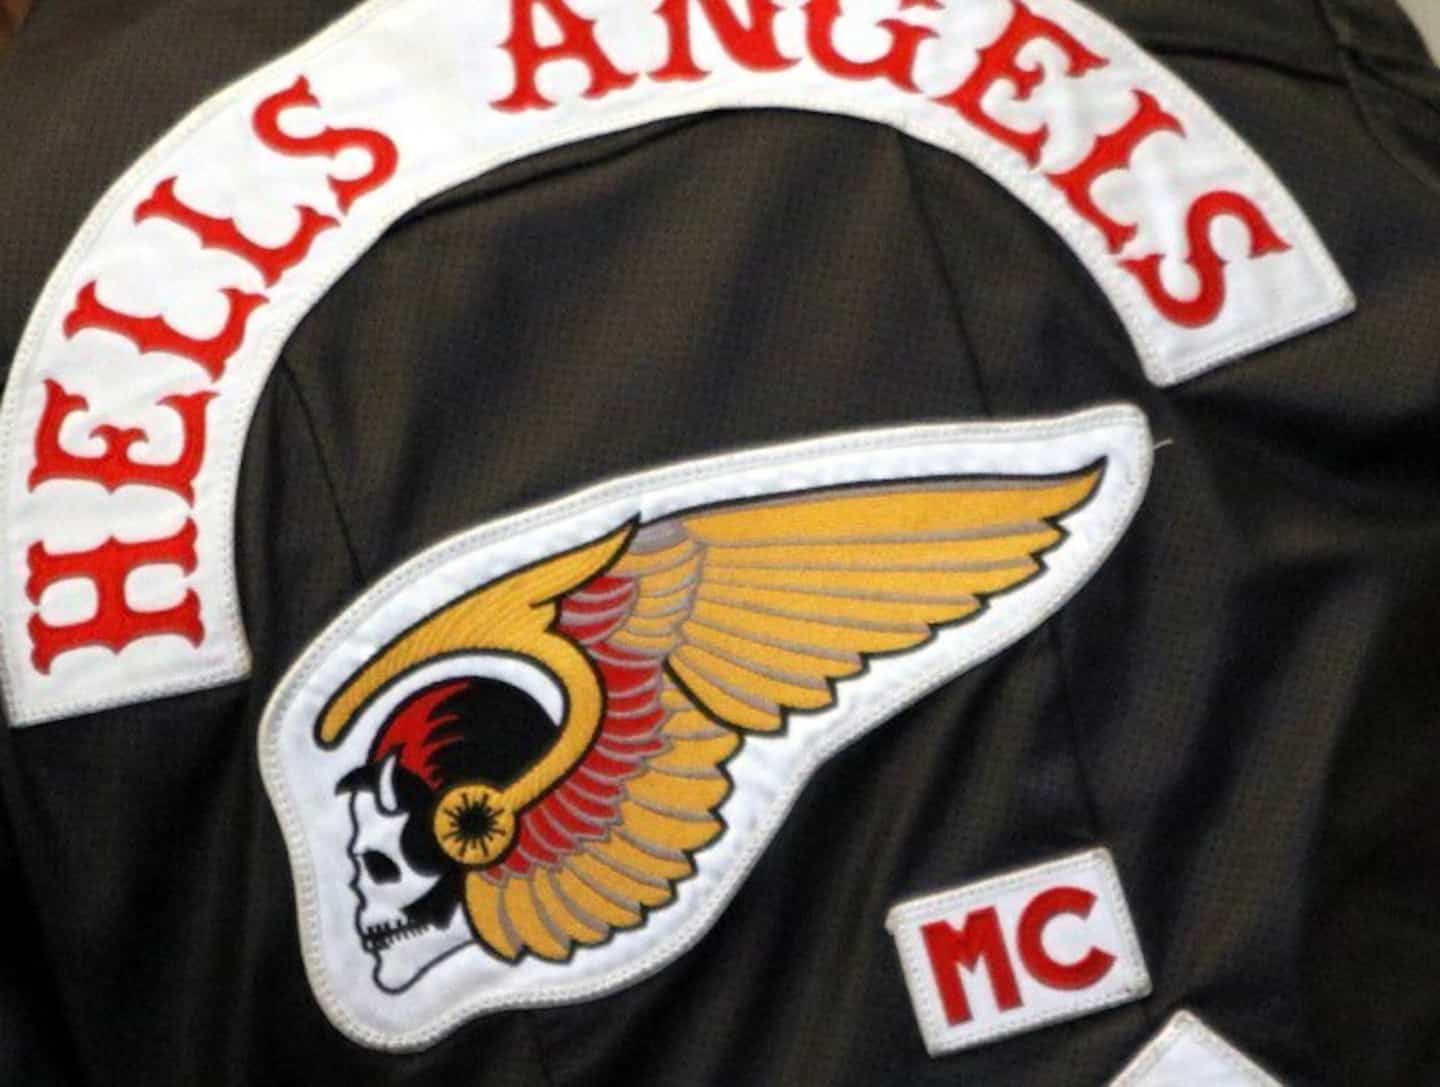 Toronto: several hundred Hells Angels expected